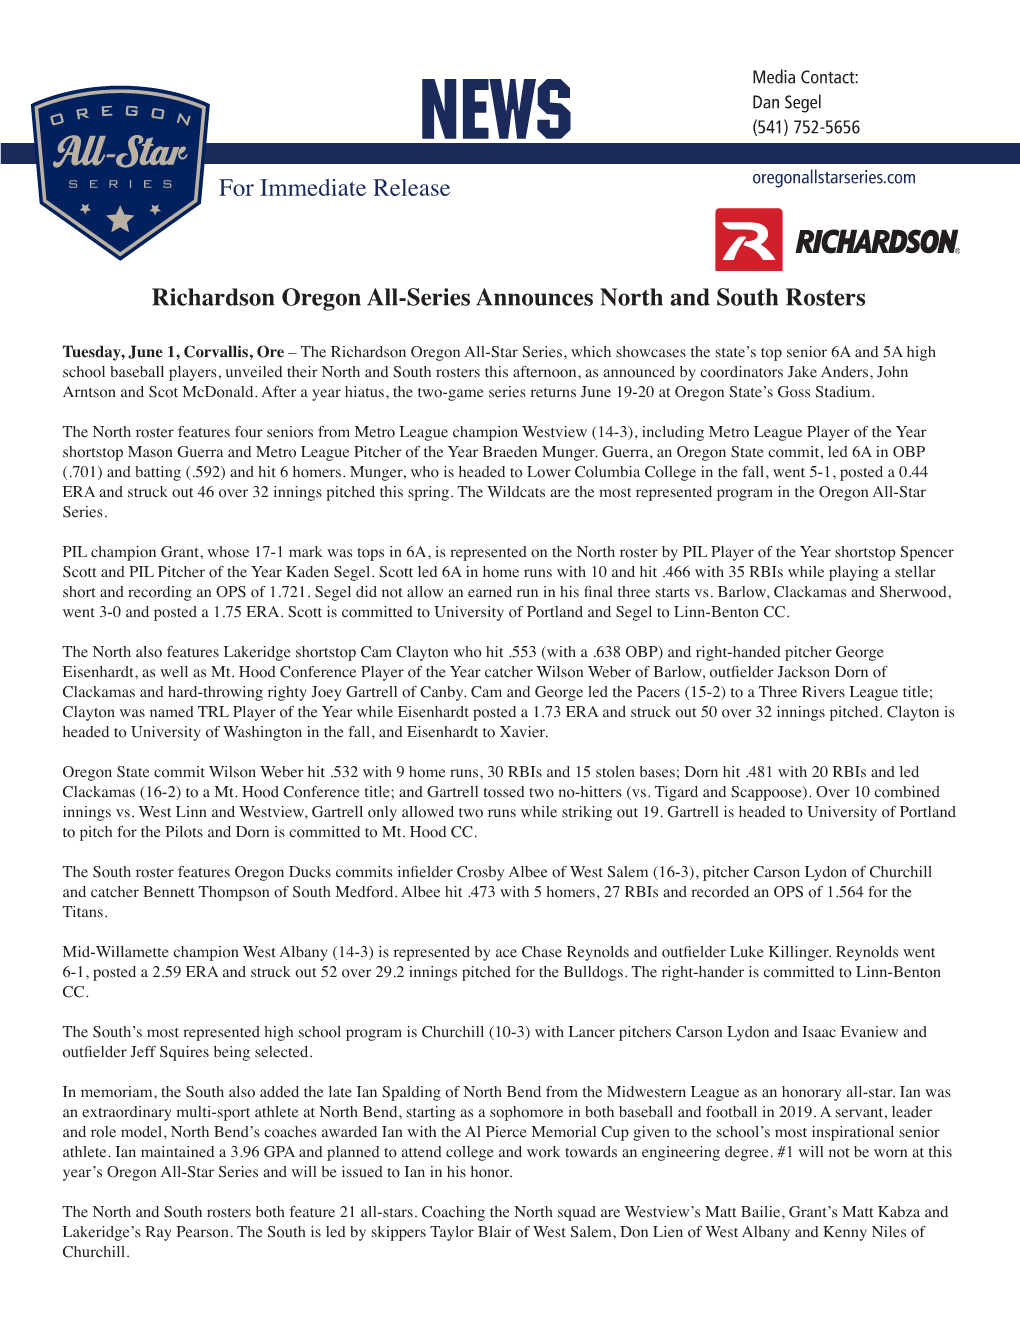 For Immediate Release Richardson Oregon All-Series Announces North and South Rosters